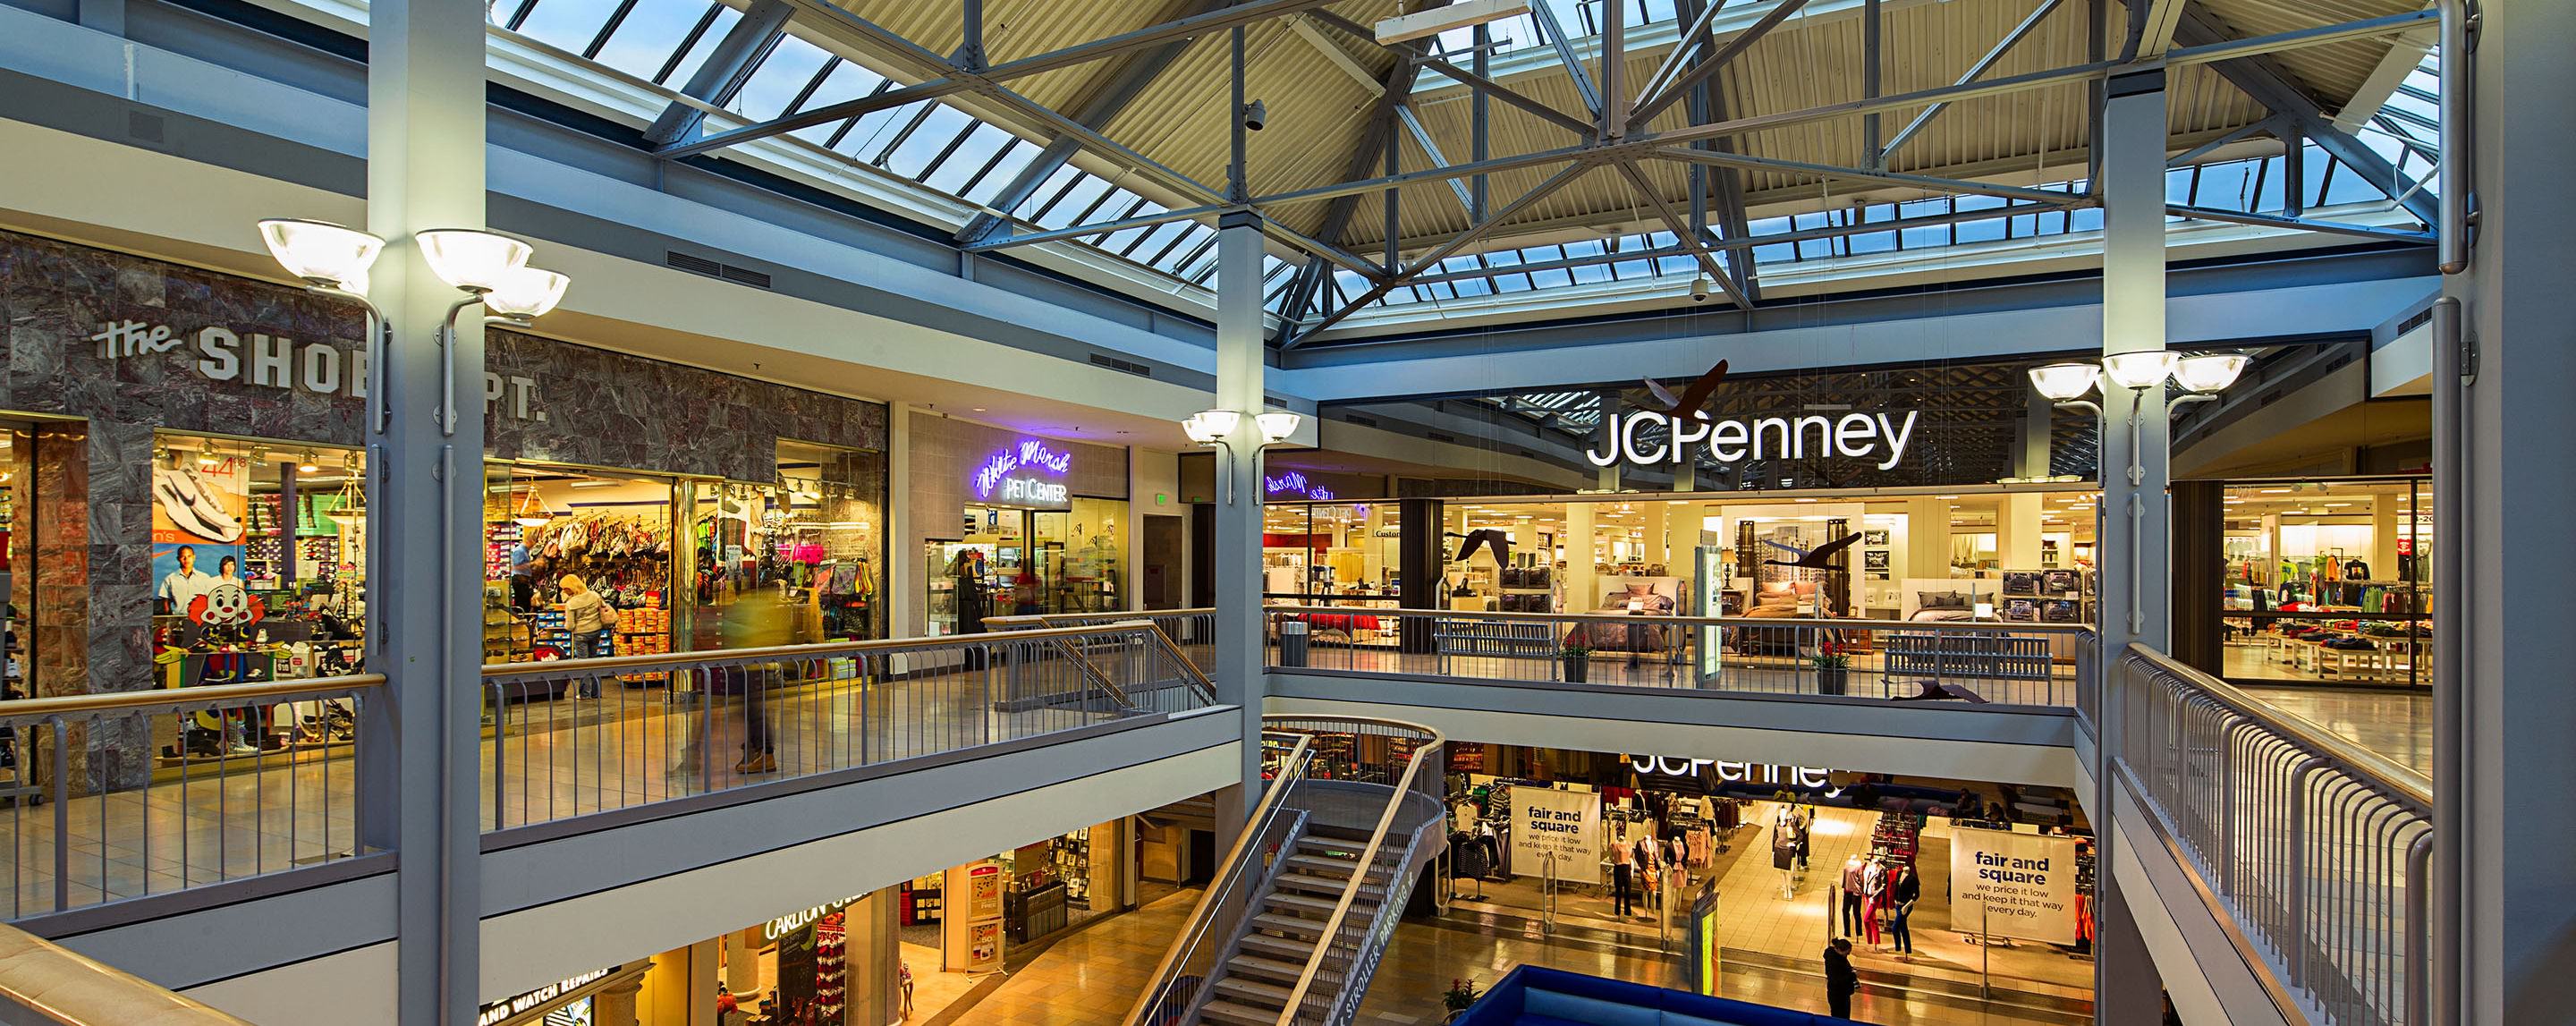 An indoor shot of a several story mall. The storefront for JC Penney can be seen on the far end.